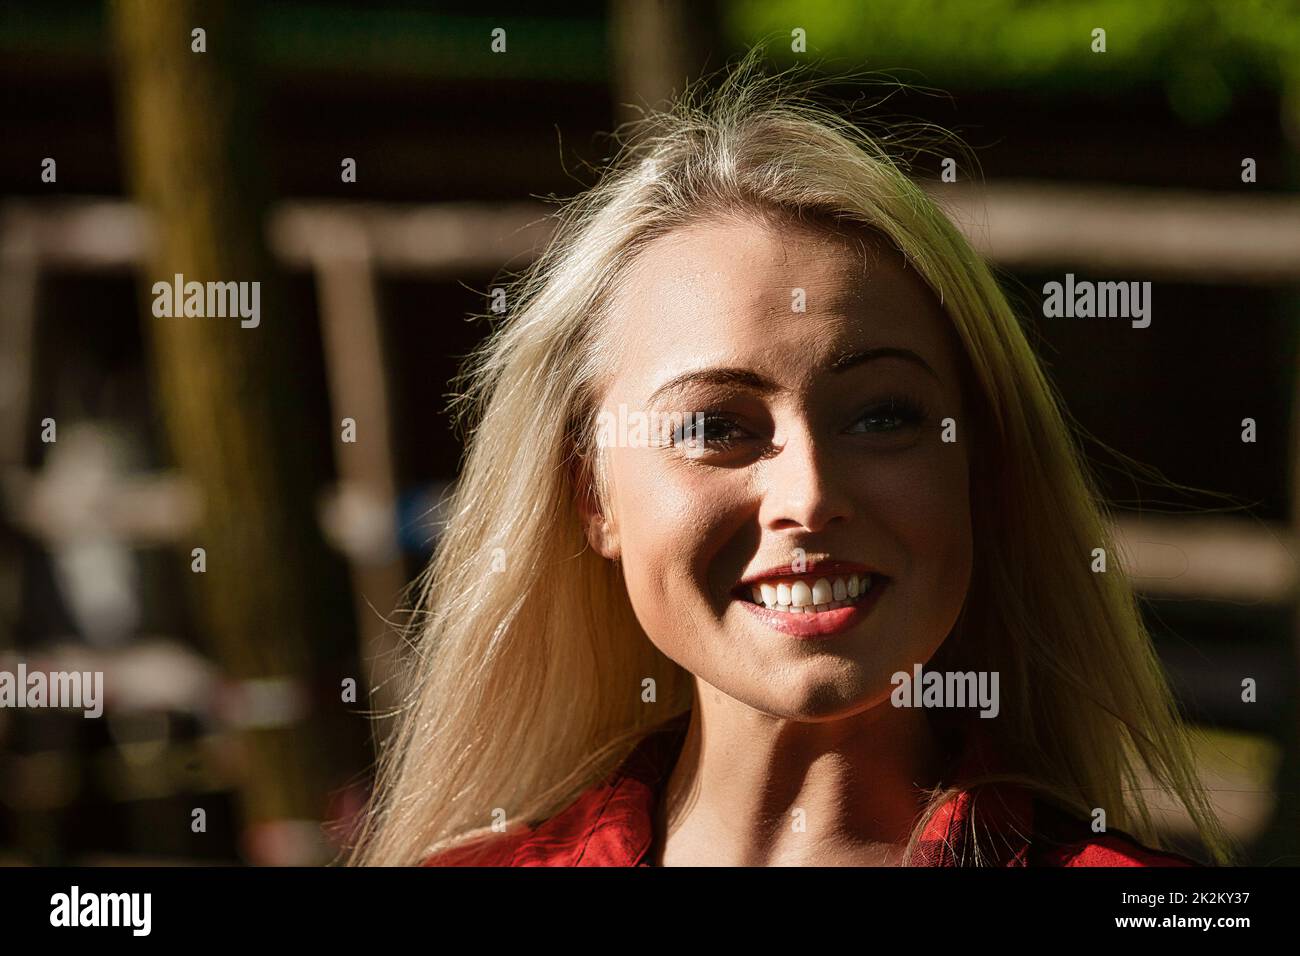 High contrast portrait of a smiling young blond woman Stock Photo